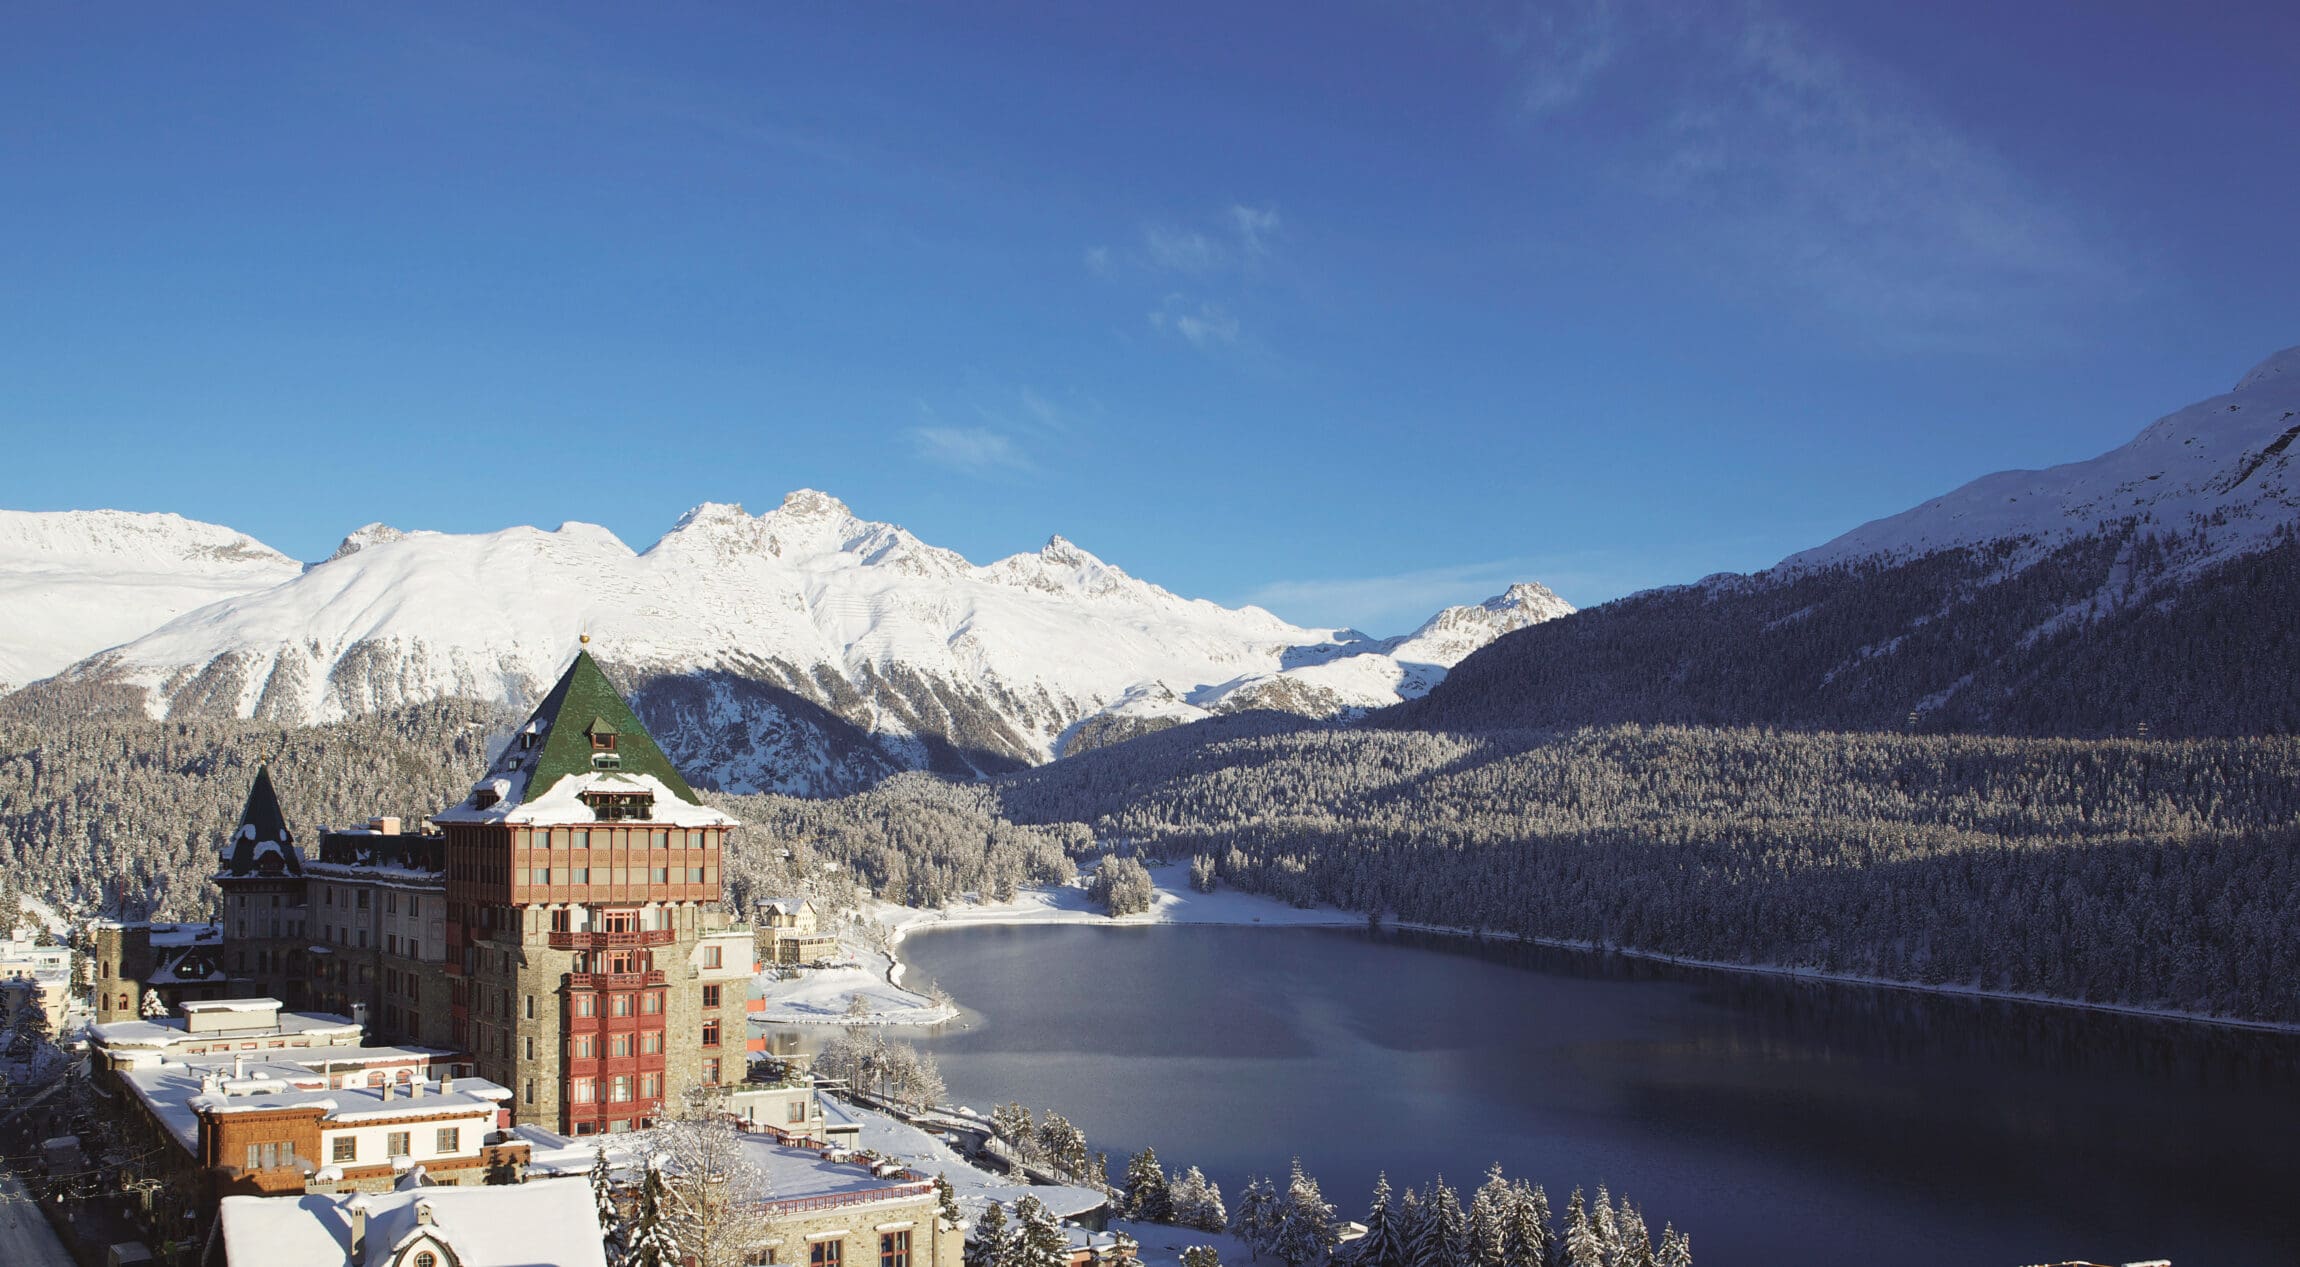 The most spectacular places to stay in the Alps this winter | Badrutt's Palace overlooking Lake St Moritz, with a snowy mountain in the background